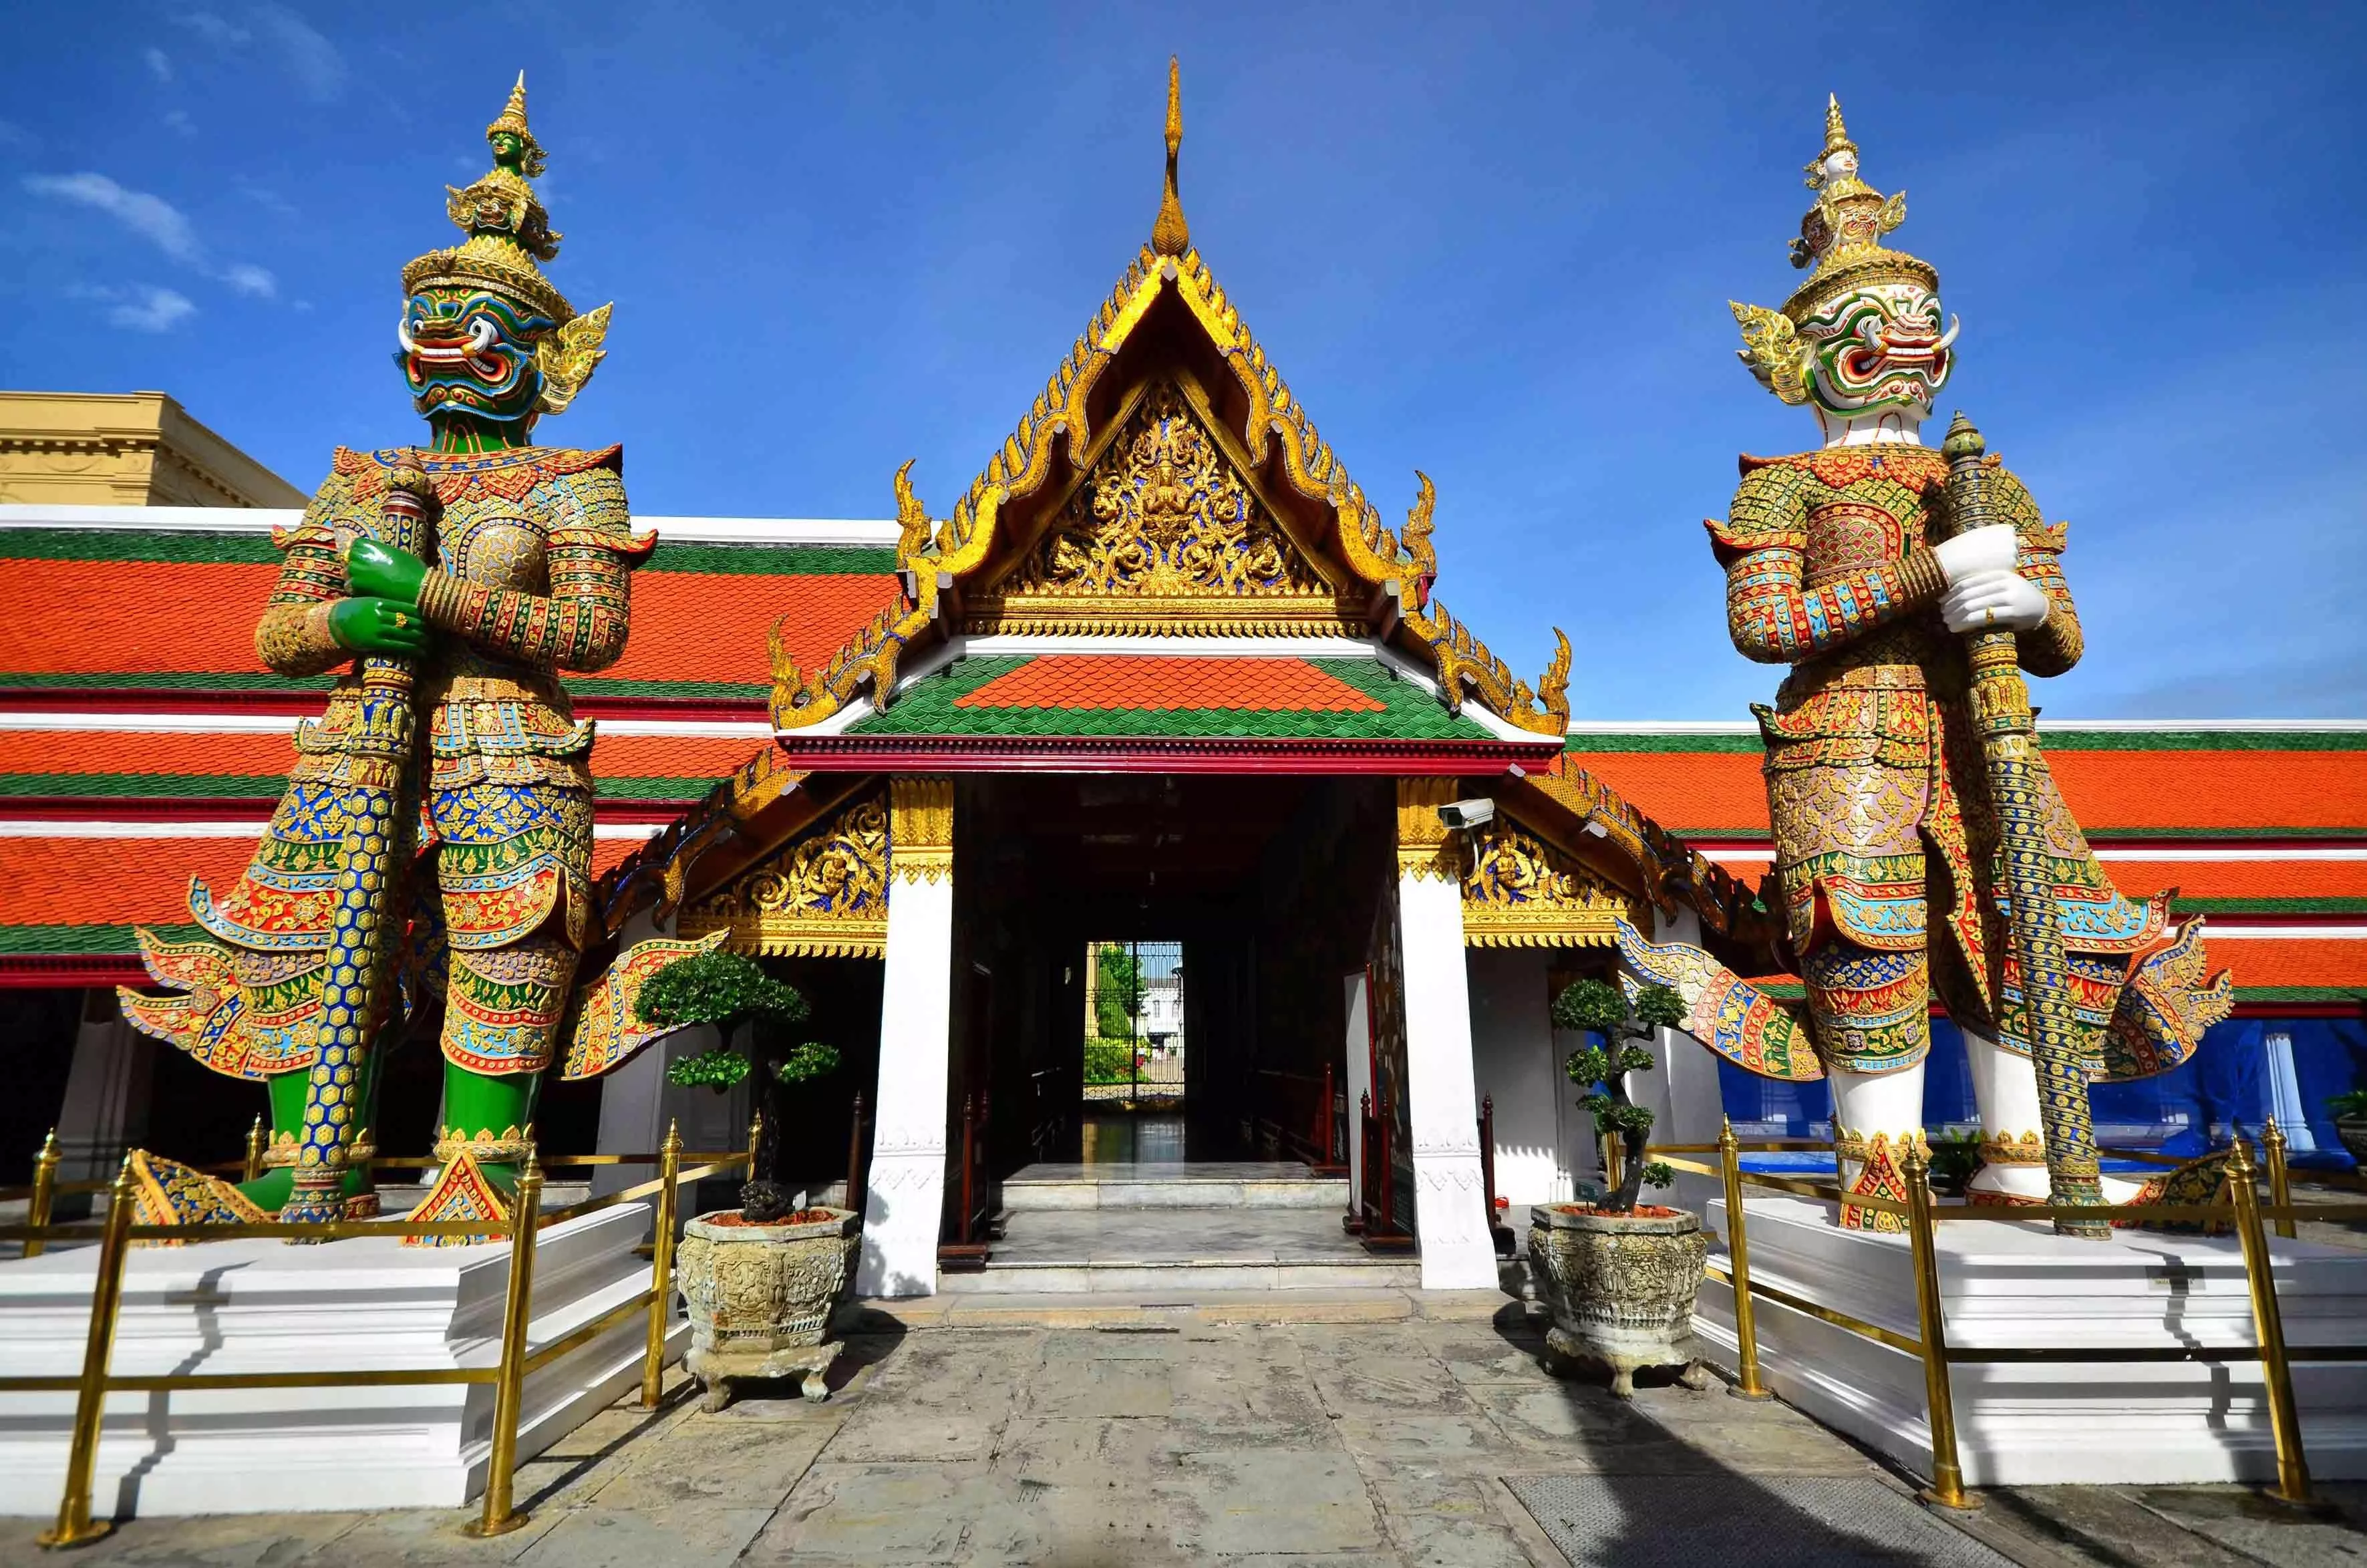 Temple of the Emerald Buddha in Thailand, Central Asia | Architecture - Rated 4.1